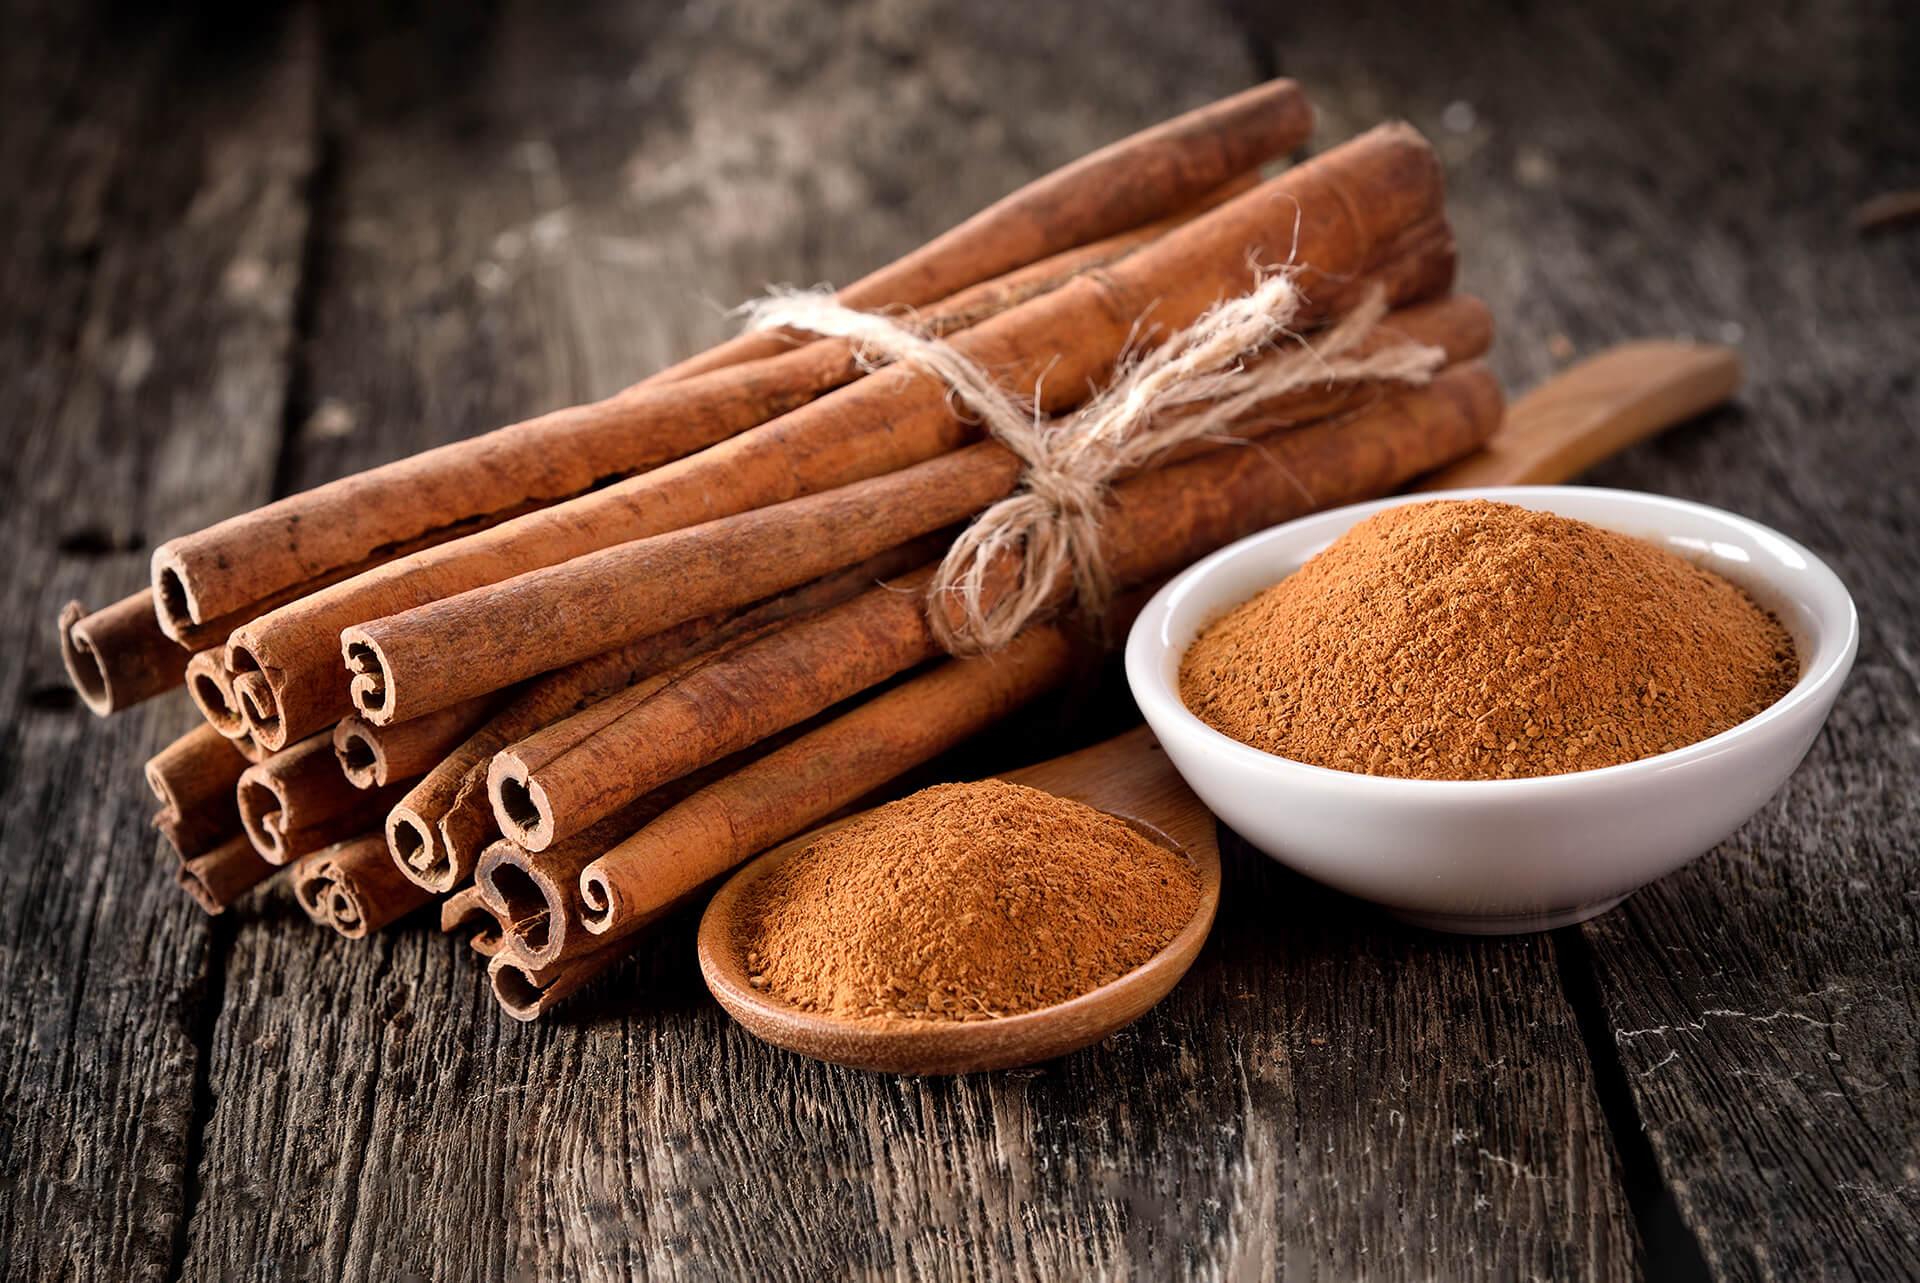 Do You Know the Nutritional Value of Cinnamon? Here's Why It’s Important!